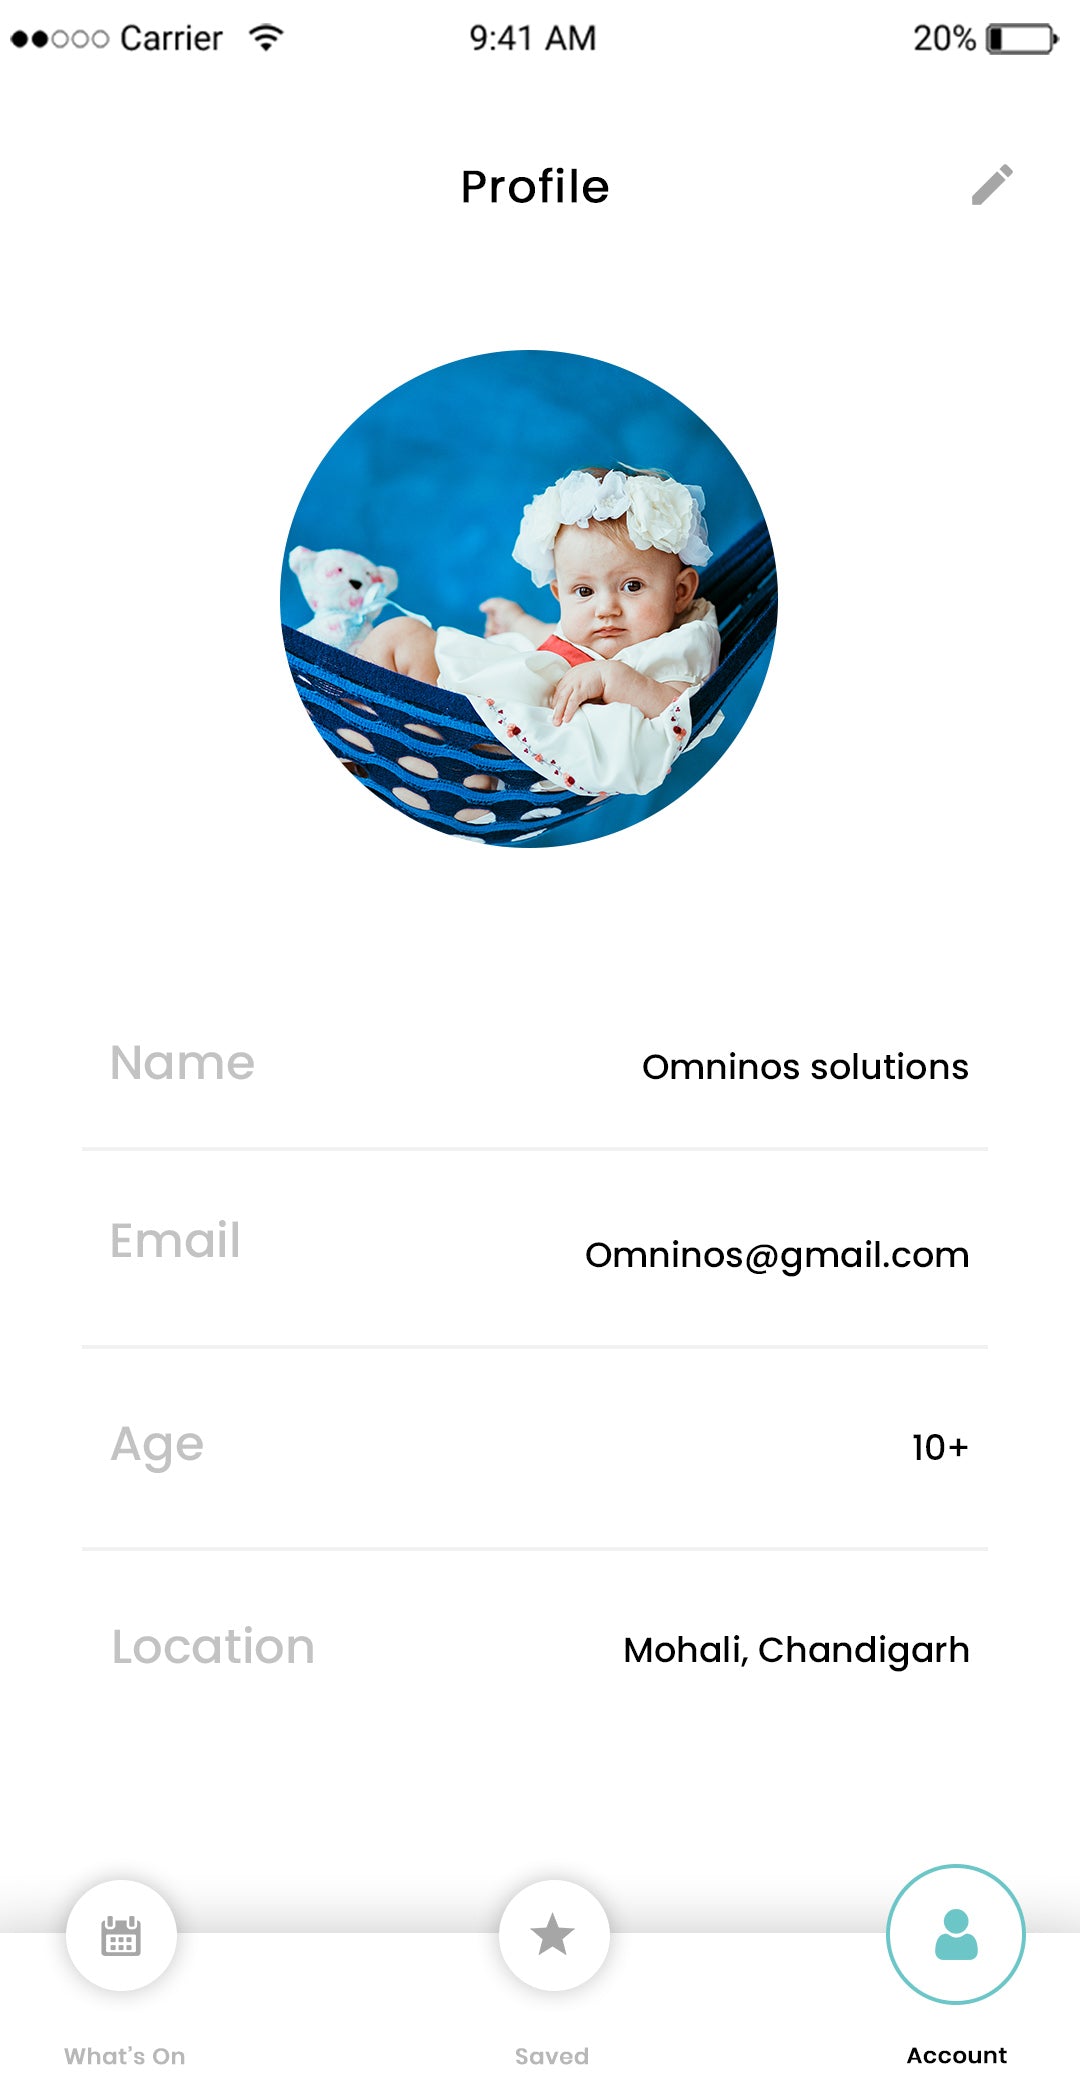 AIDAIO Event Clone App Script: Empower Your Vision With Omninos, Profile Screen